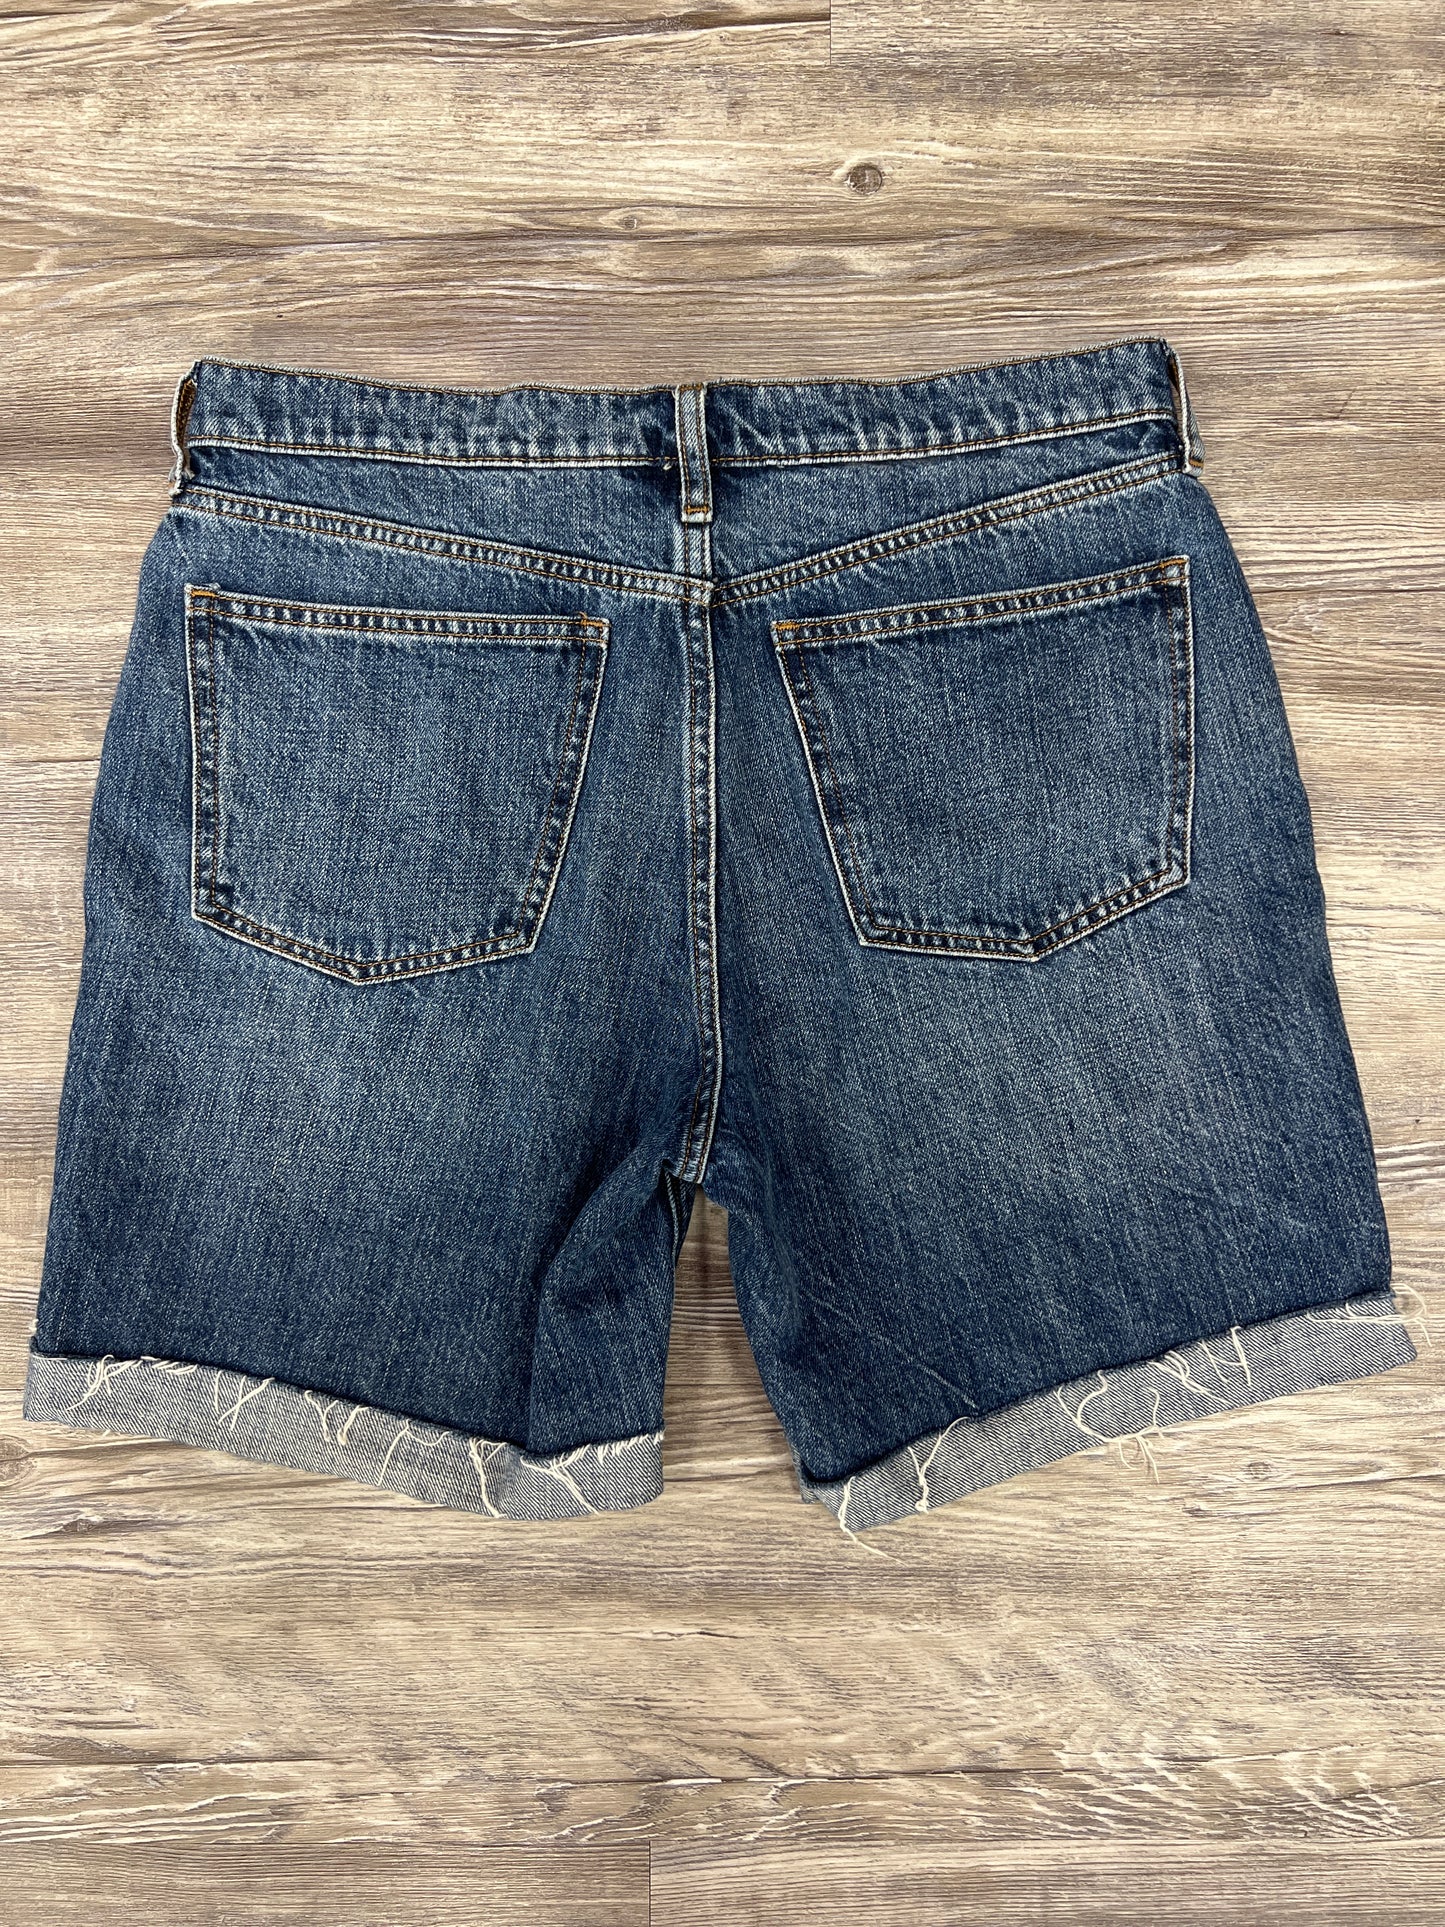 Shorts By Gap Size: 4